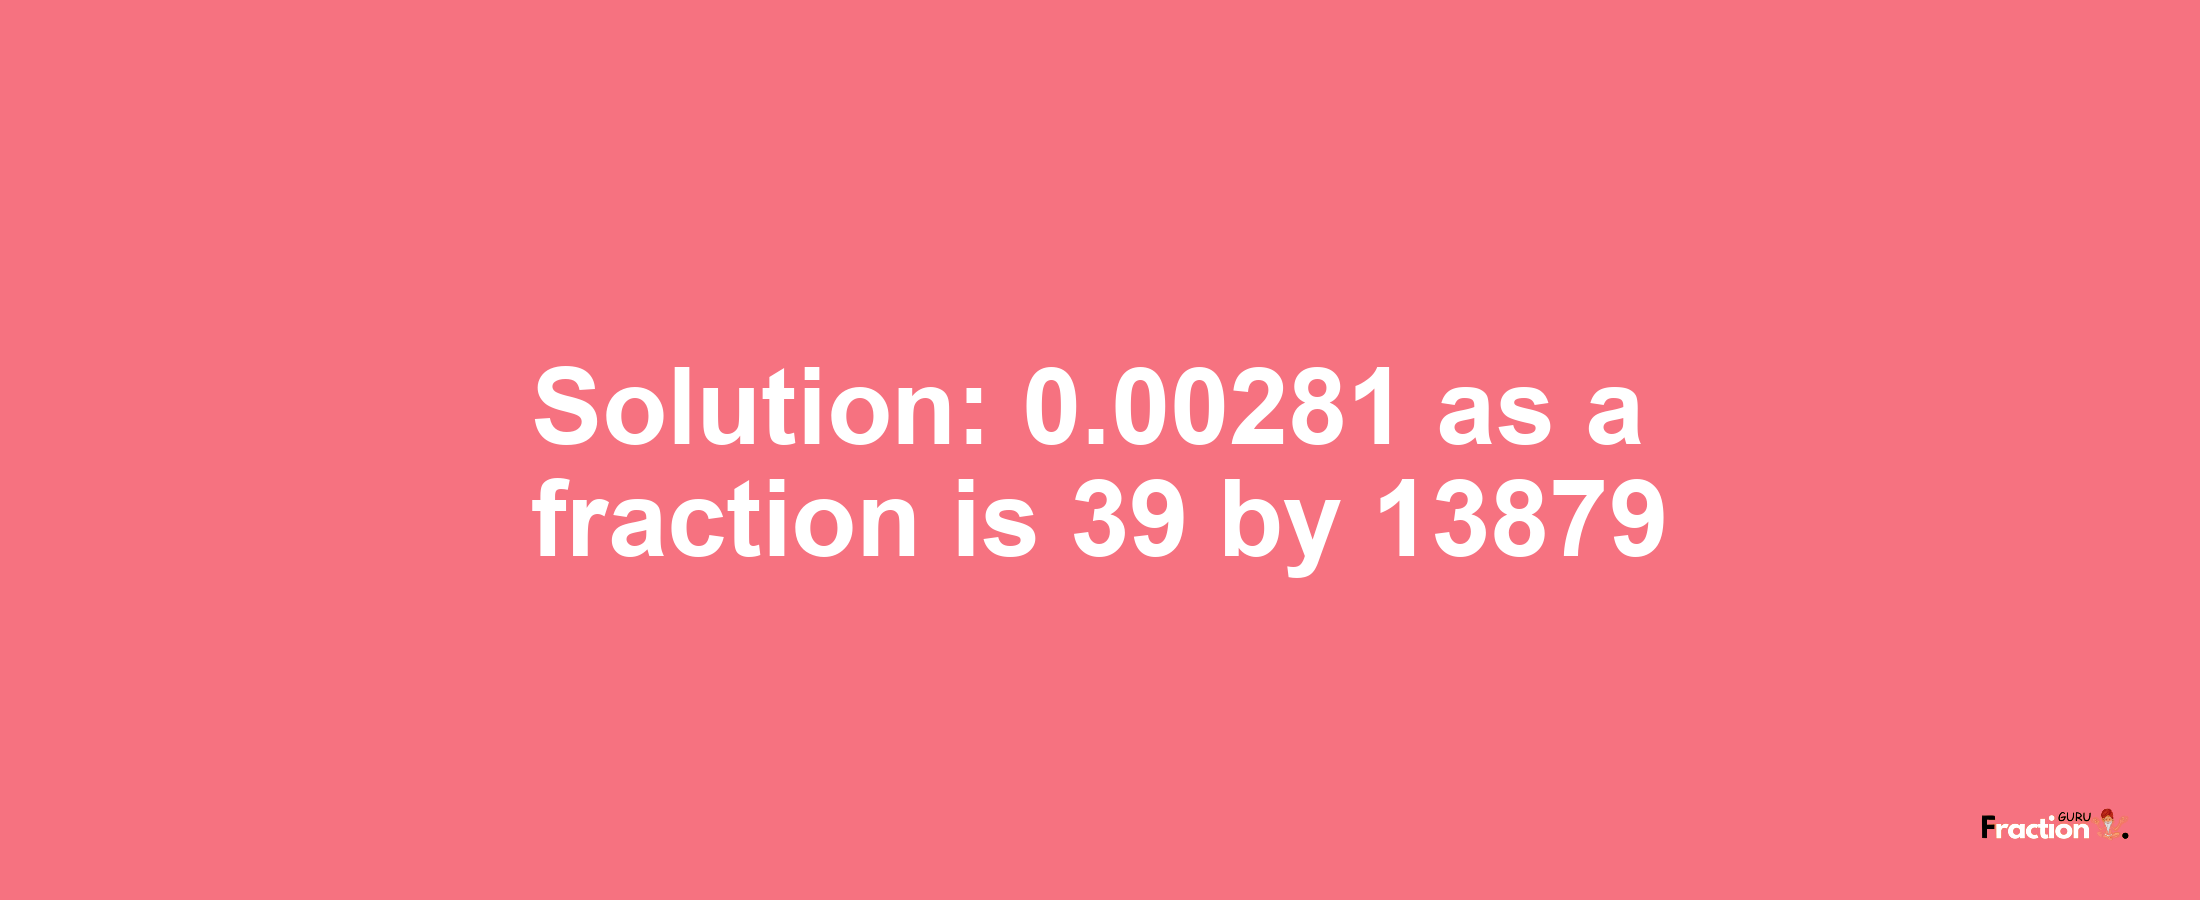 Solution:0.00281 as a fraction is 39/13879